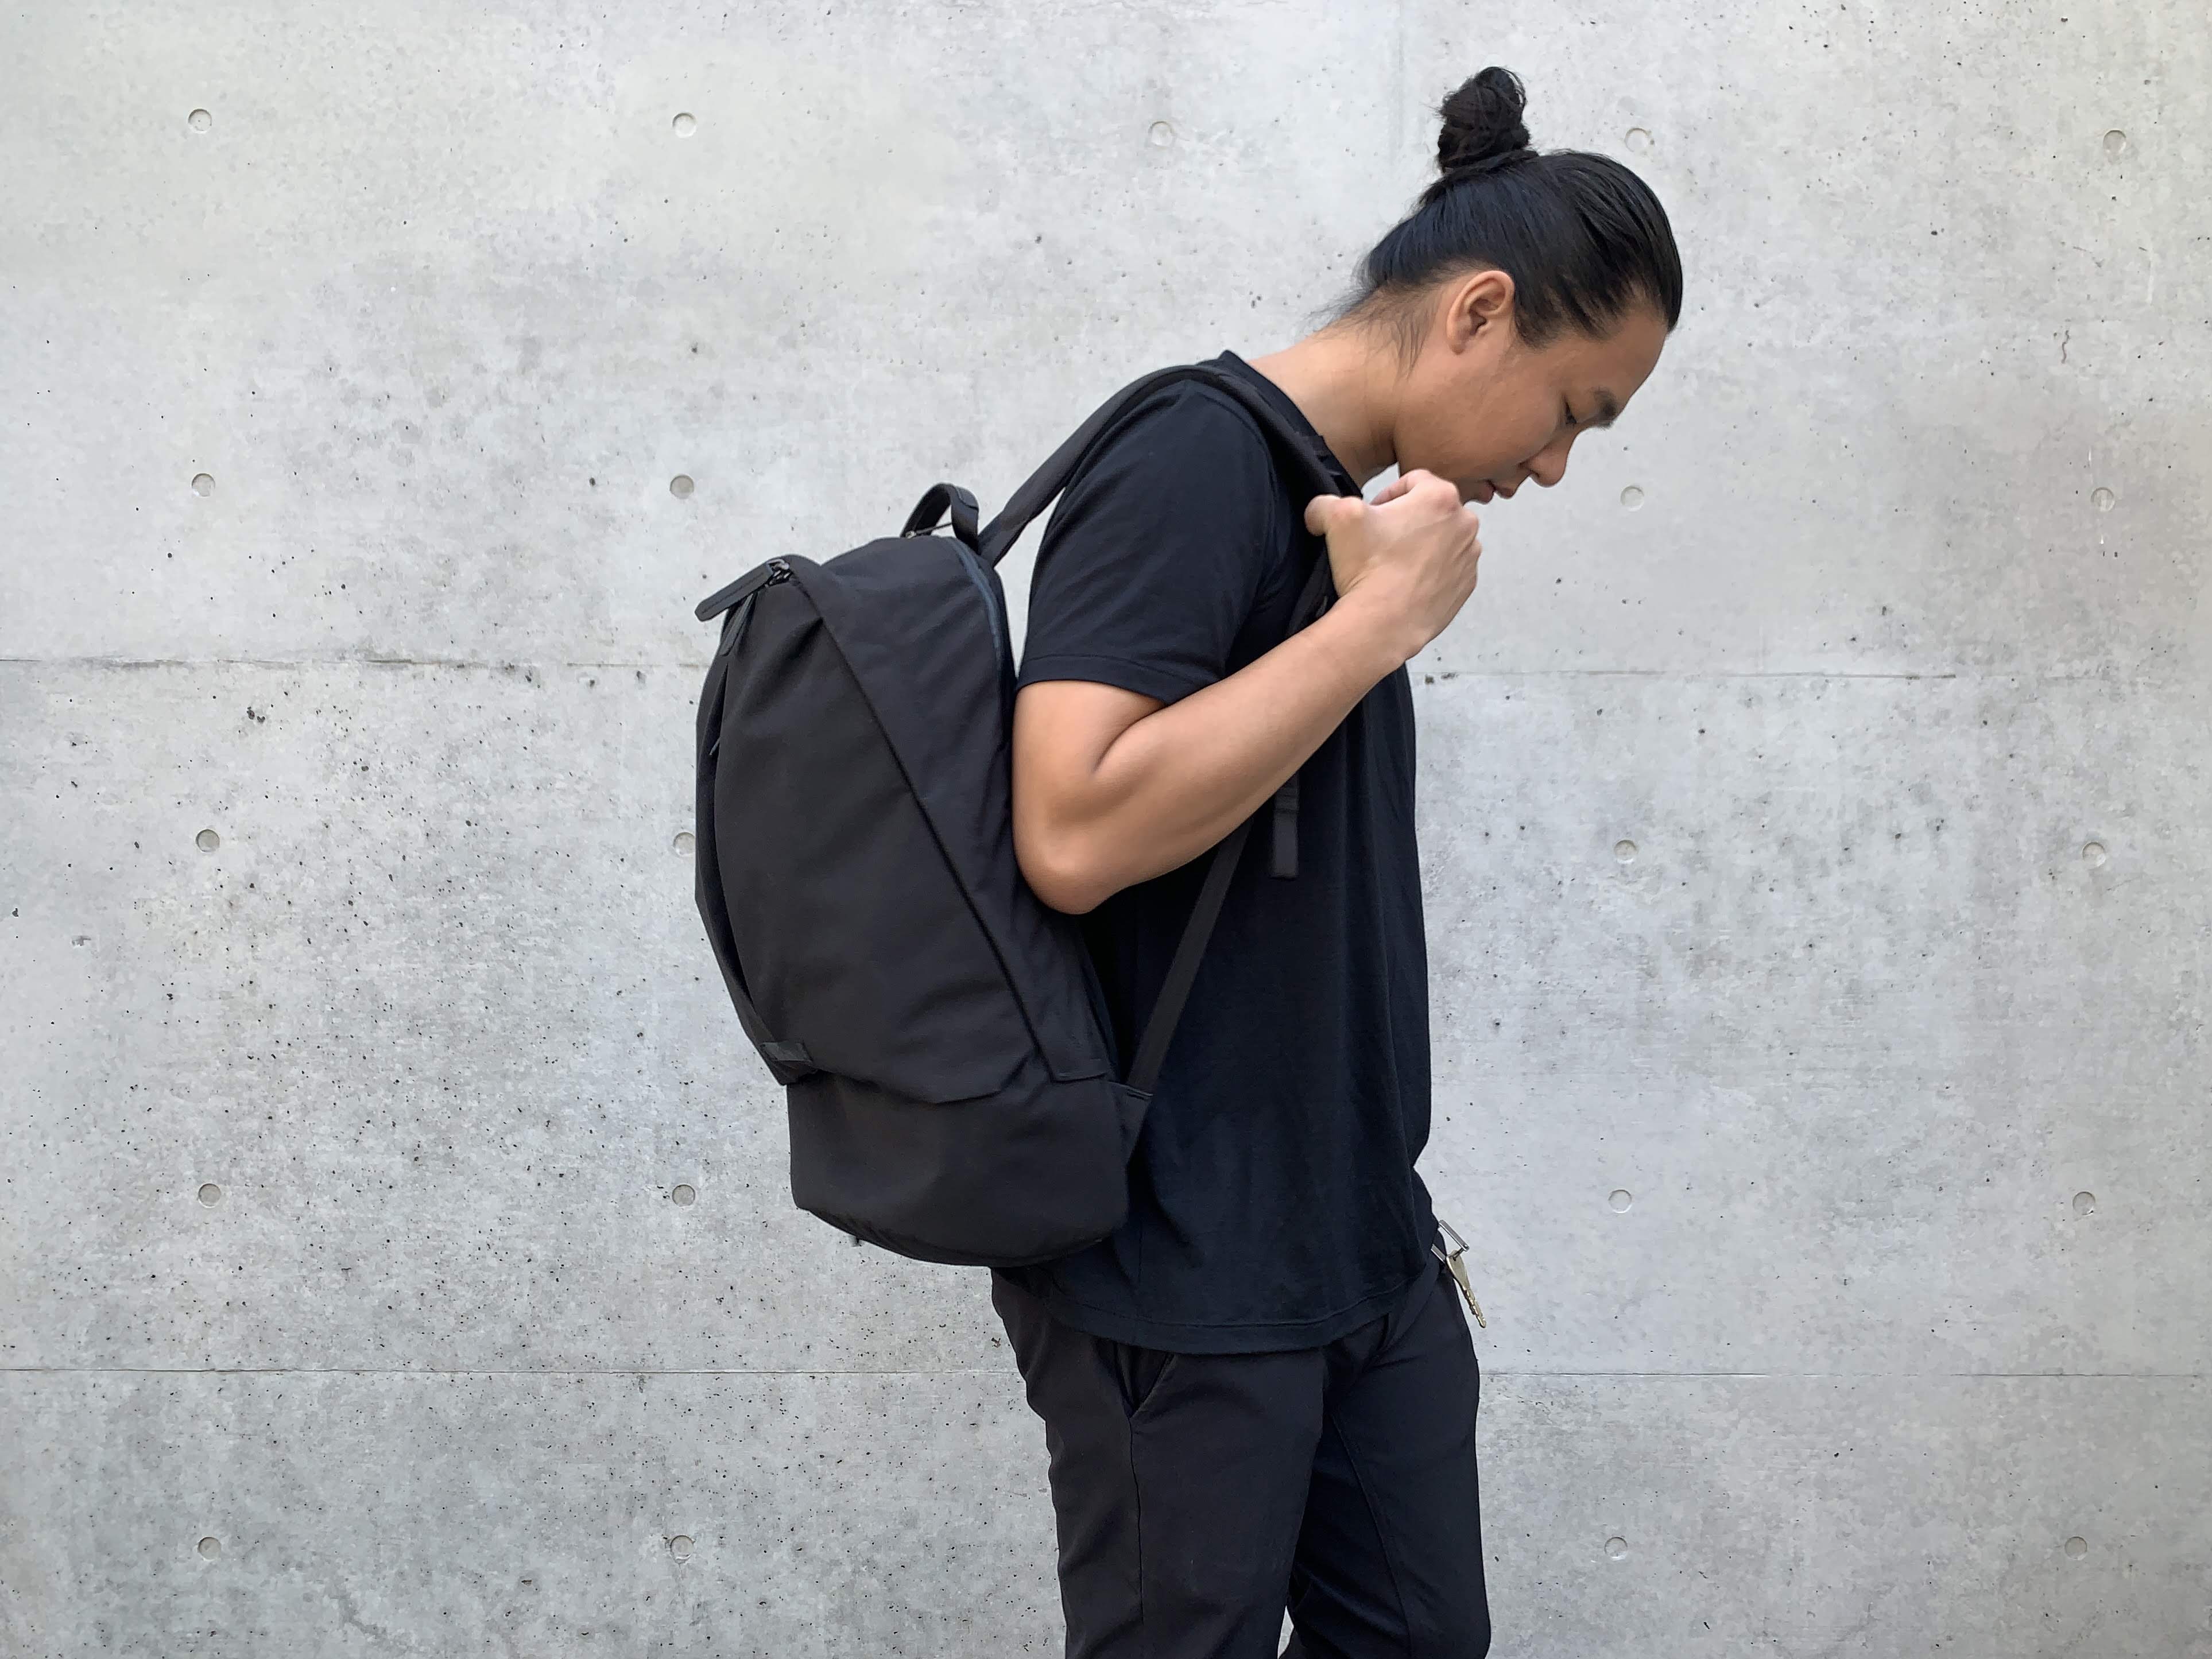 Bellroy Classic Backpack Plus 22 liters, 15 Laptop, Spare Clothes, Headphones, Notebook Black 